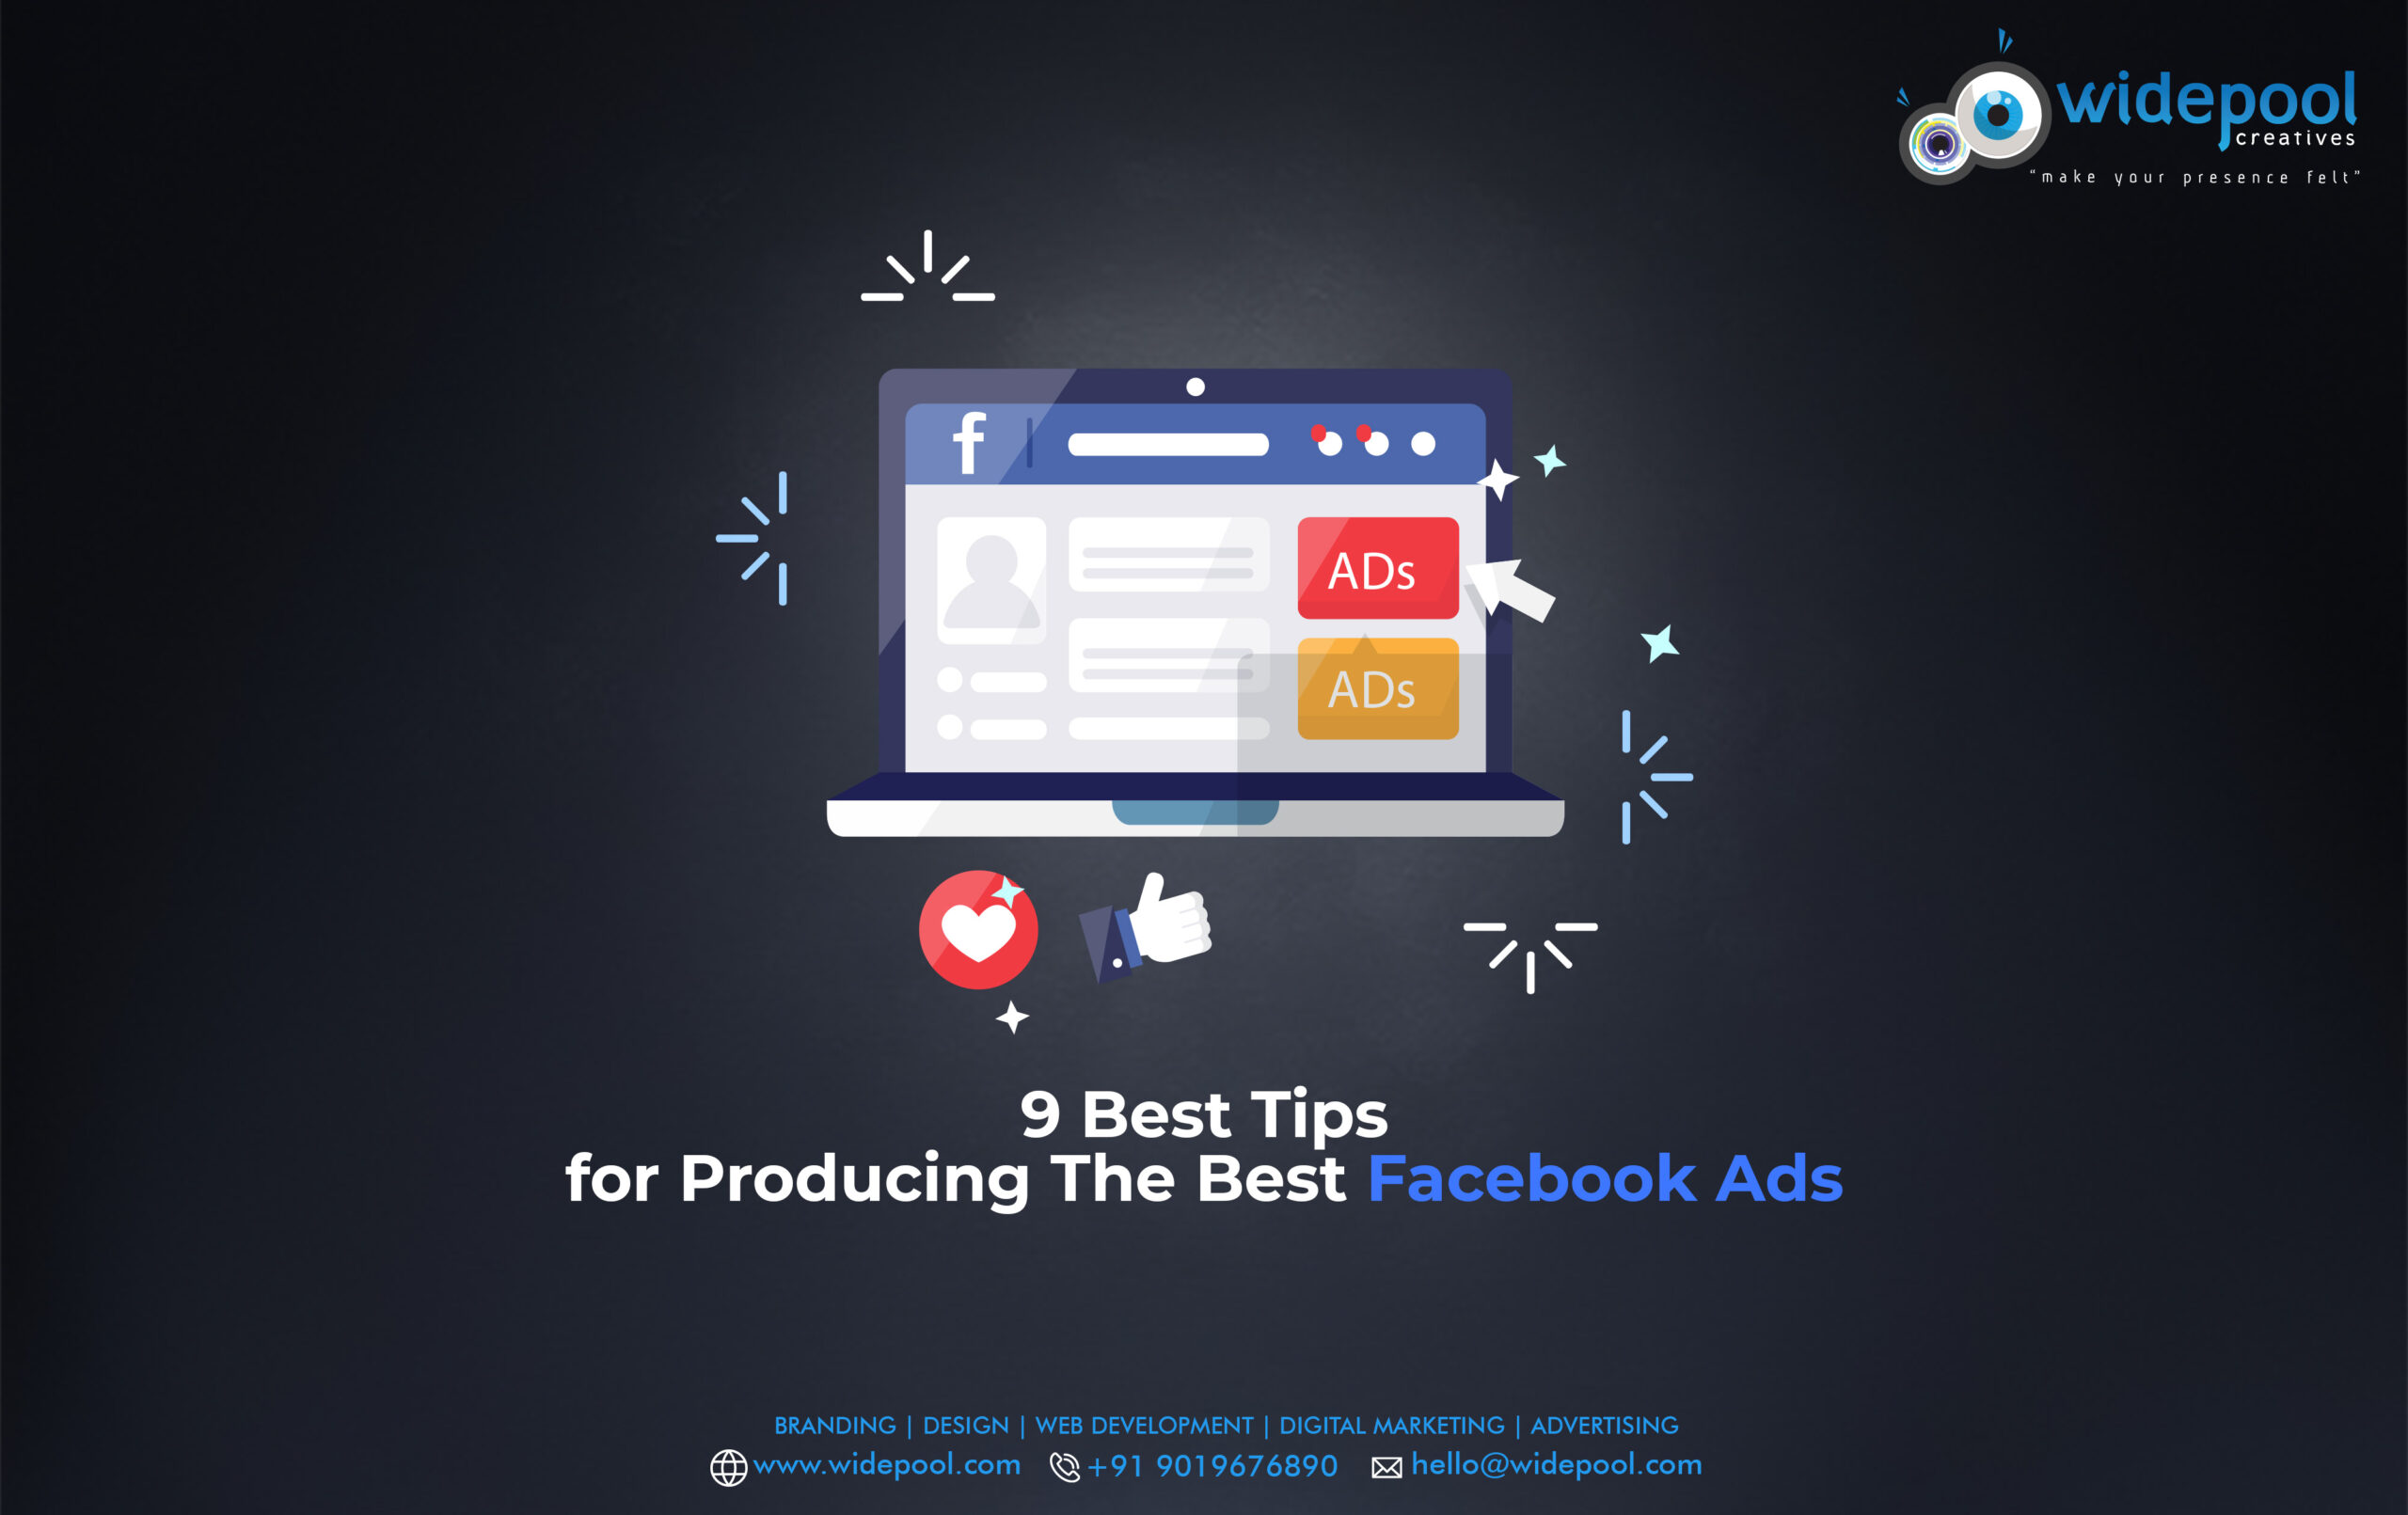 9 Best Tips for Producing the Best Facebook Ads